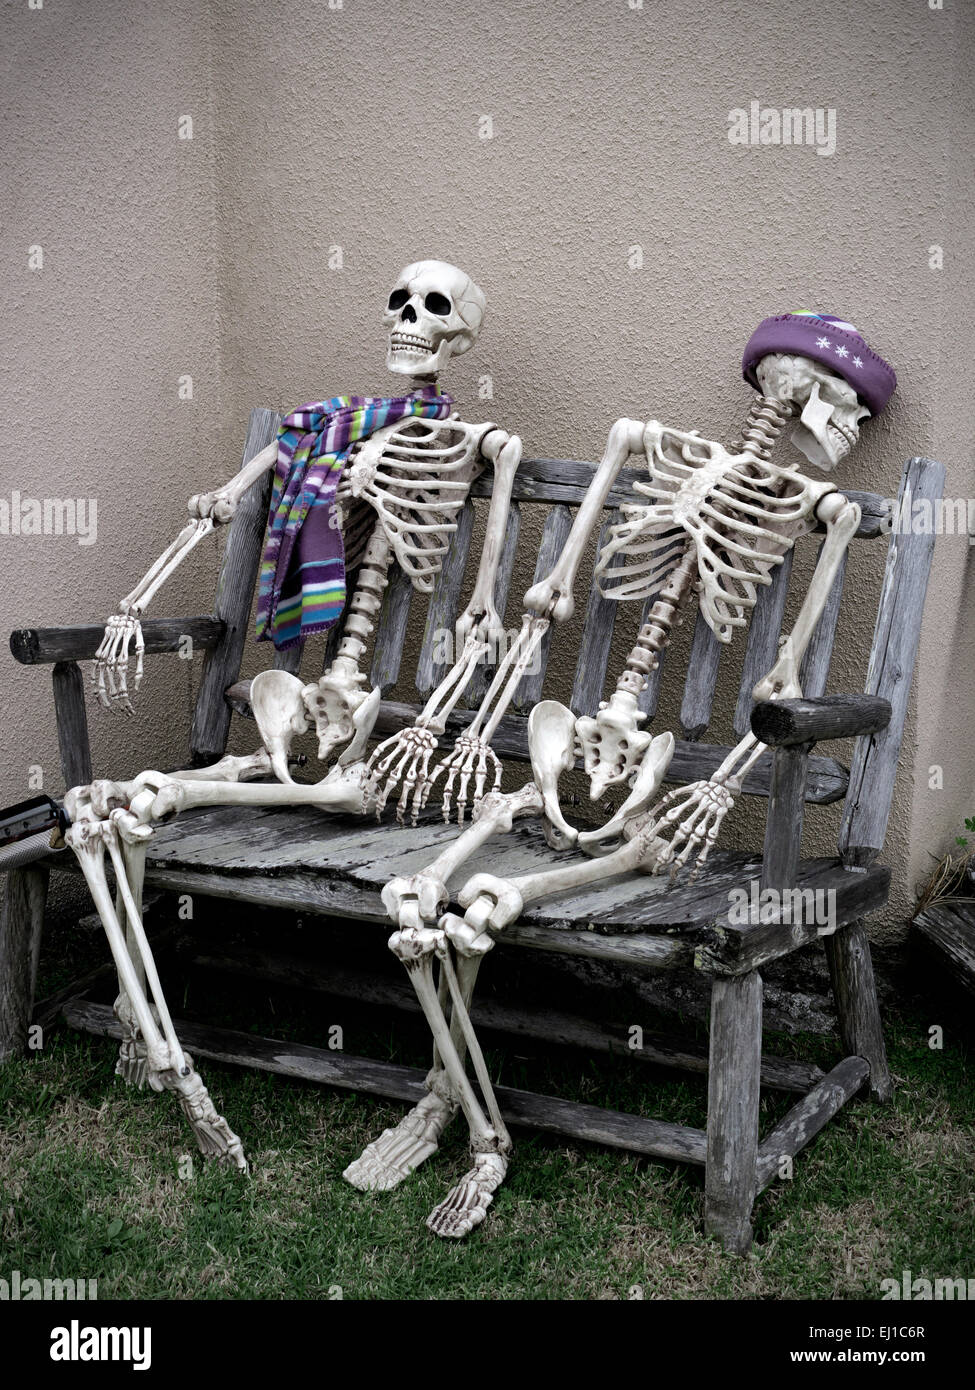 SKELETONS SITTING BENCH OUTDOORS FUN WAITING Conceptual dark humour image of two skeletons sitting waiting a lifetime together on a garden bench Stock Photo